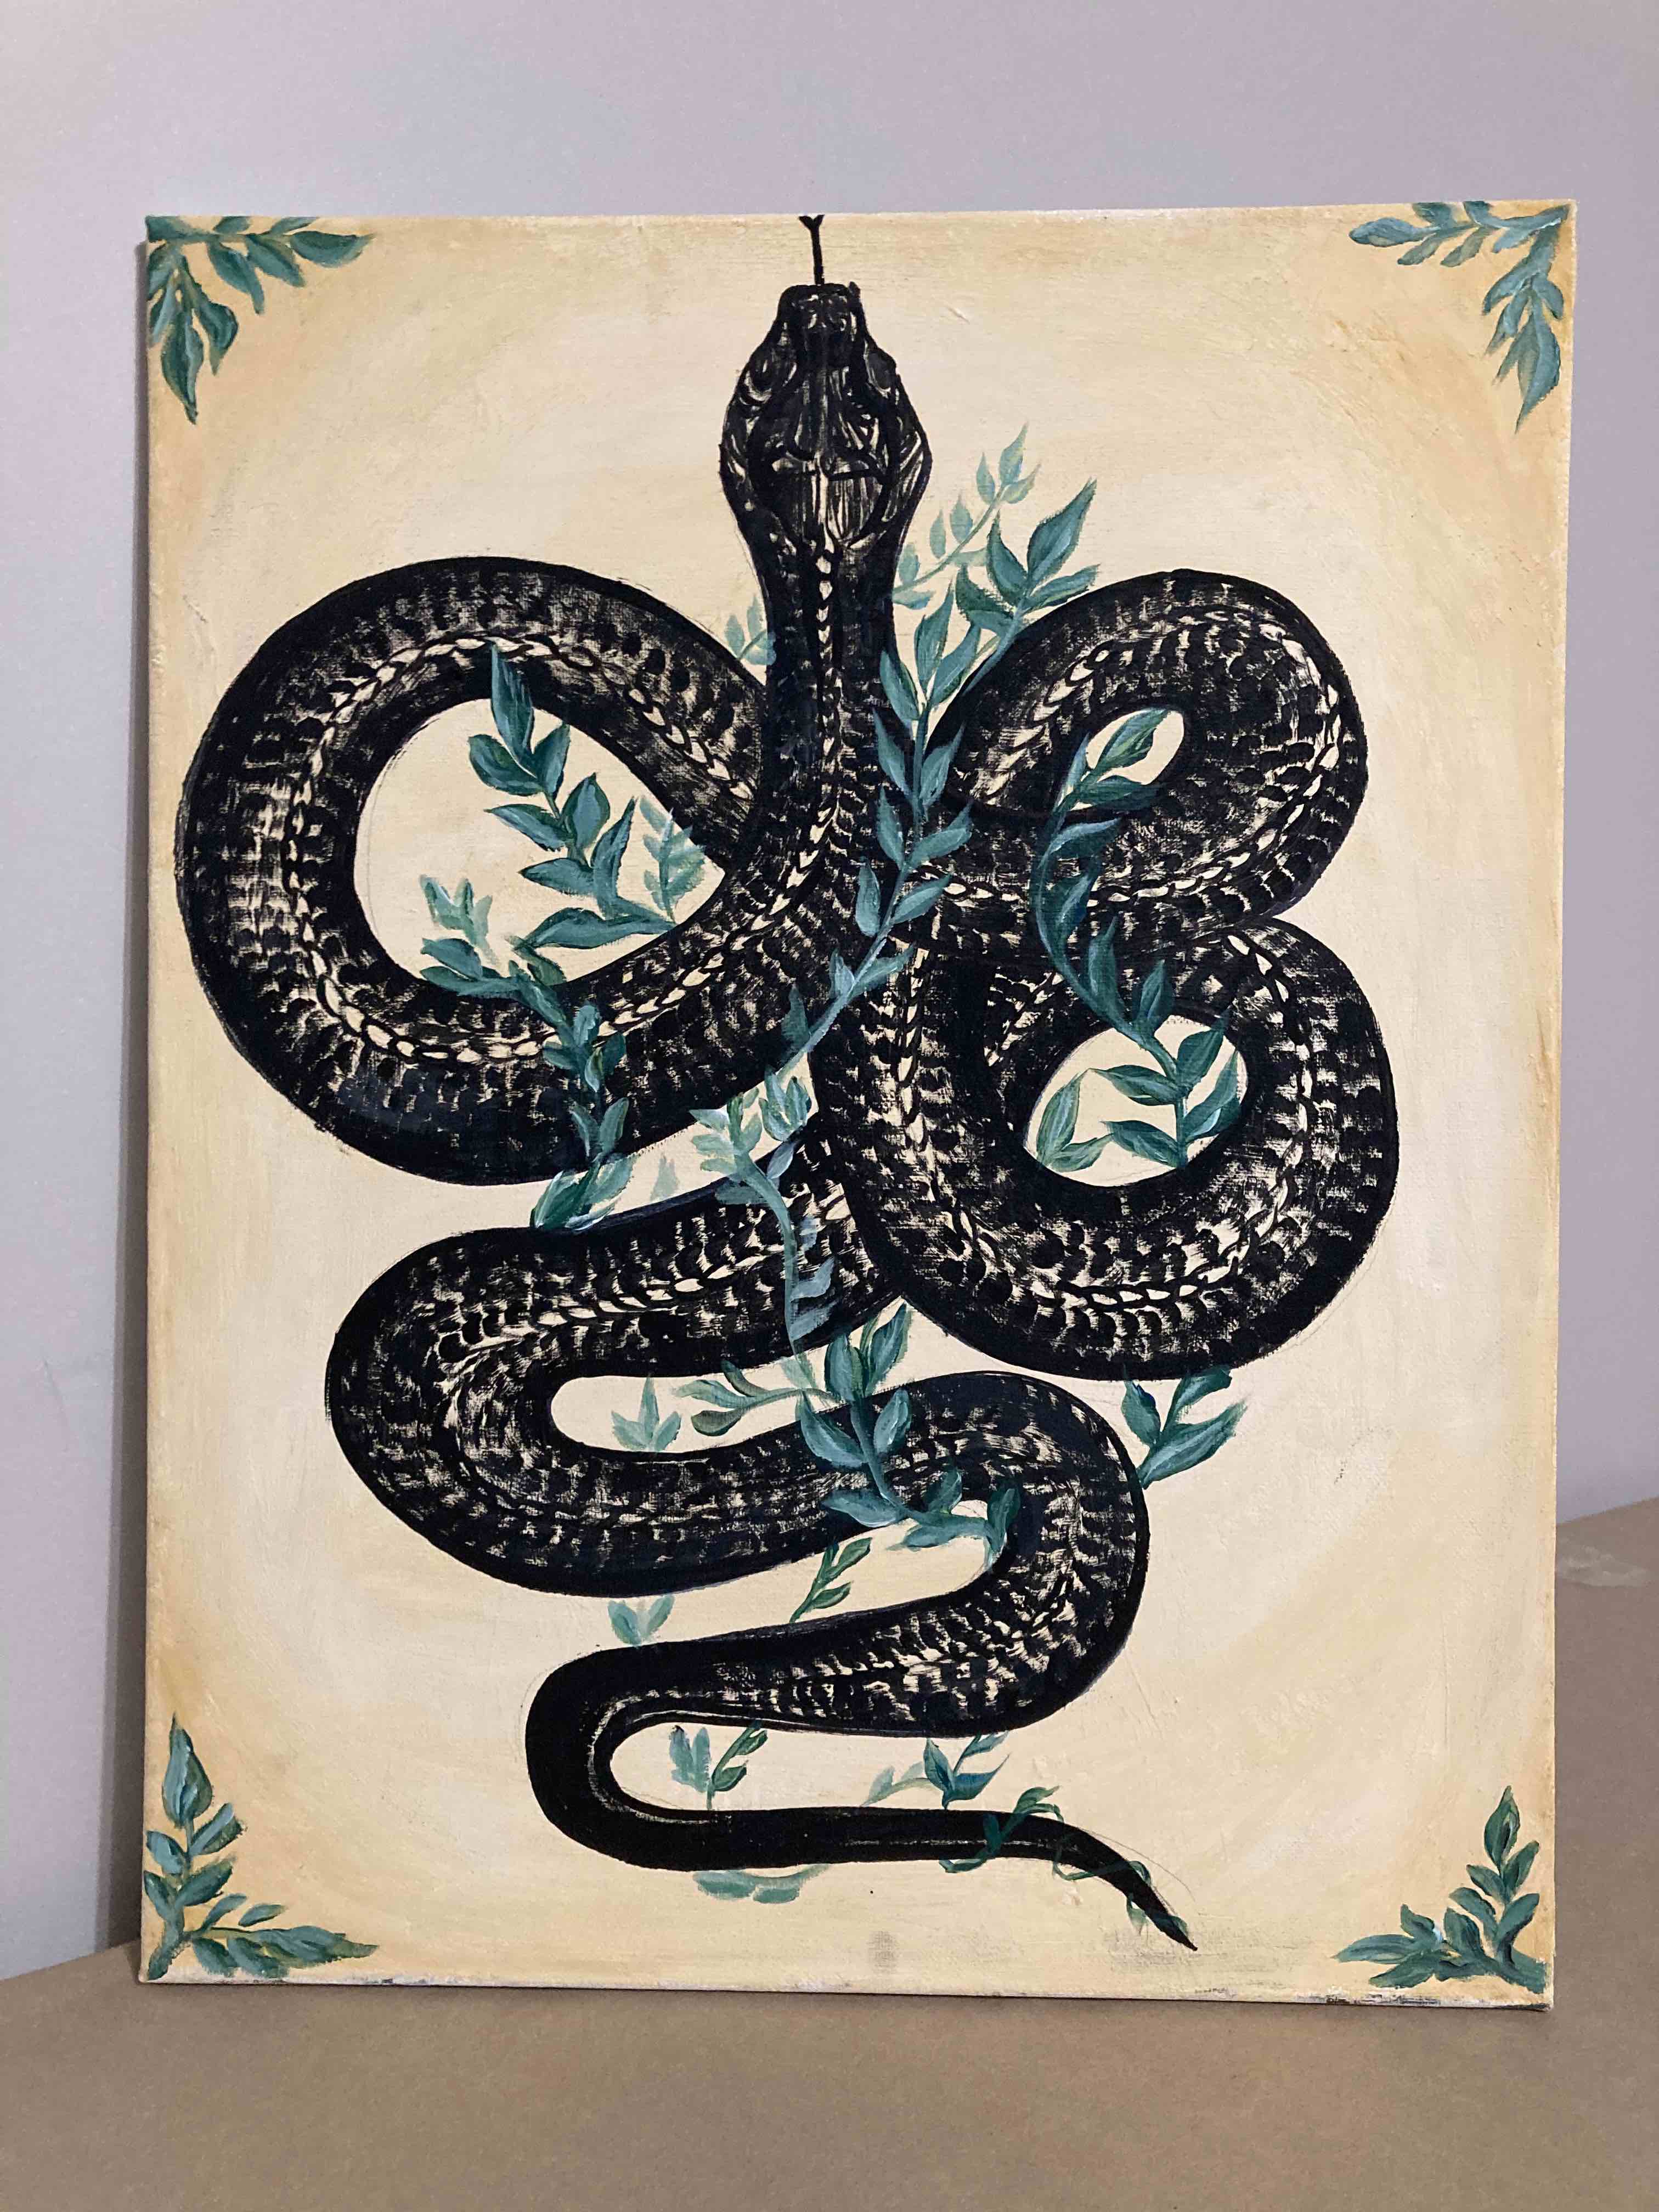 Snakes and Letters | Acrylic paint on canvas (20” X 15”). Black snakes, beautiful vines and yellow paint. This snake is perfect for that urban jungle vibe. The curves add a nice movement to the corners of rooms and walls.